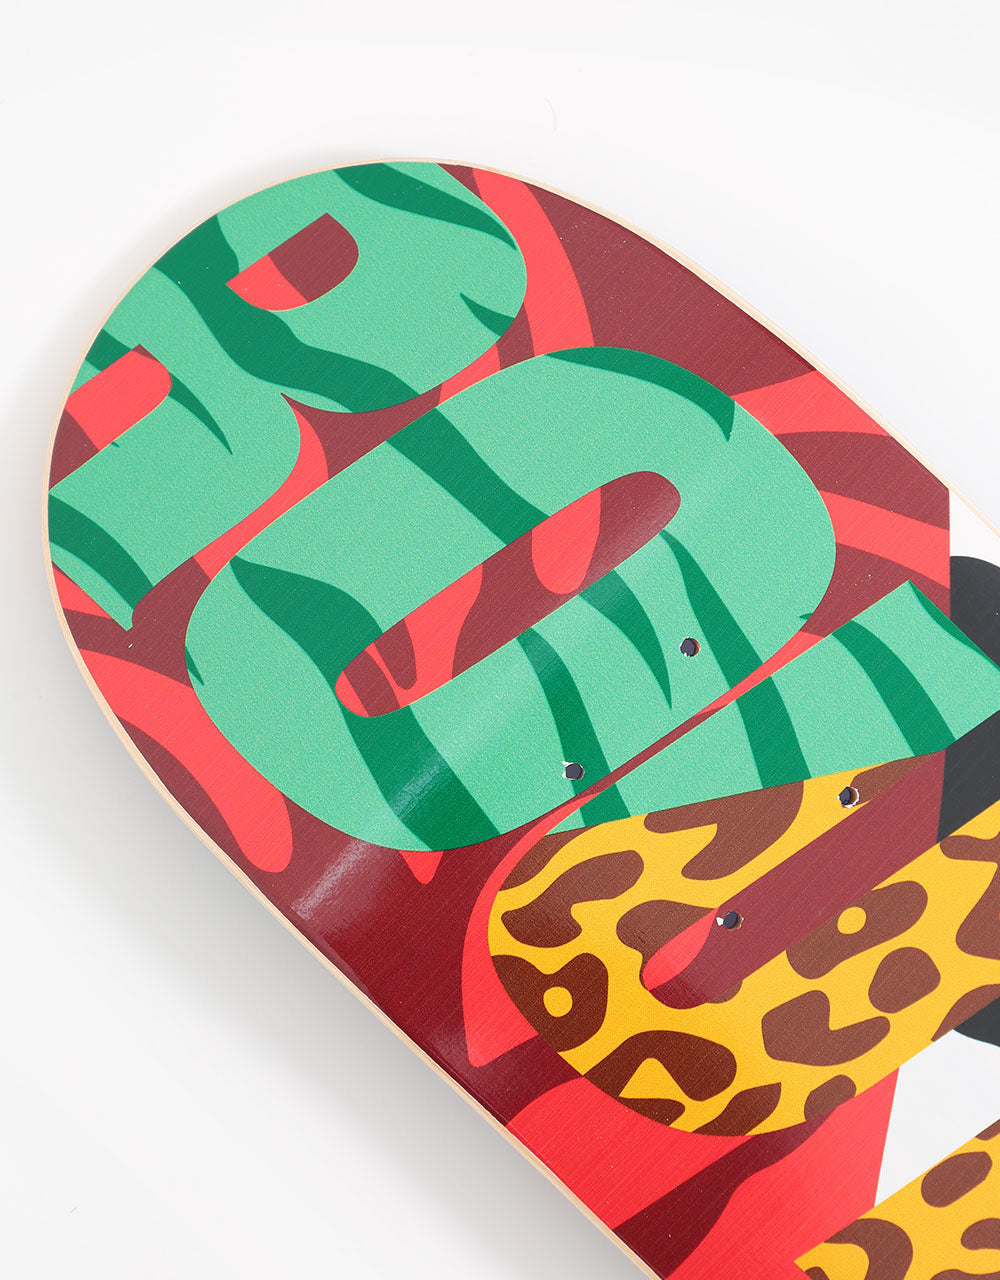 Route One 'What The' 'OG Shape' Skateboard Deck - 7.75"